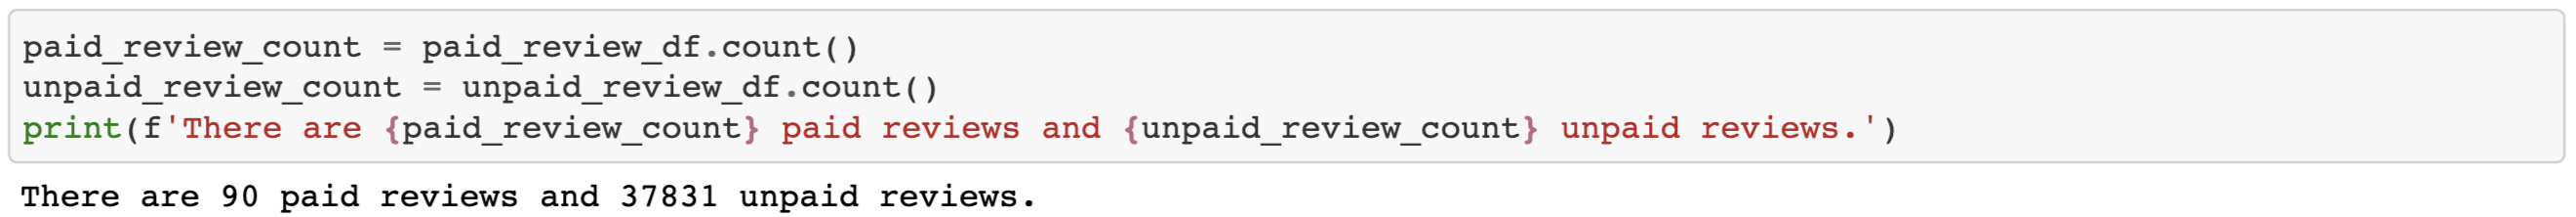 Paid and Unpaid Review Count